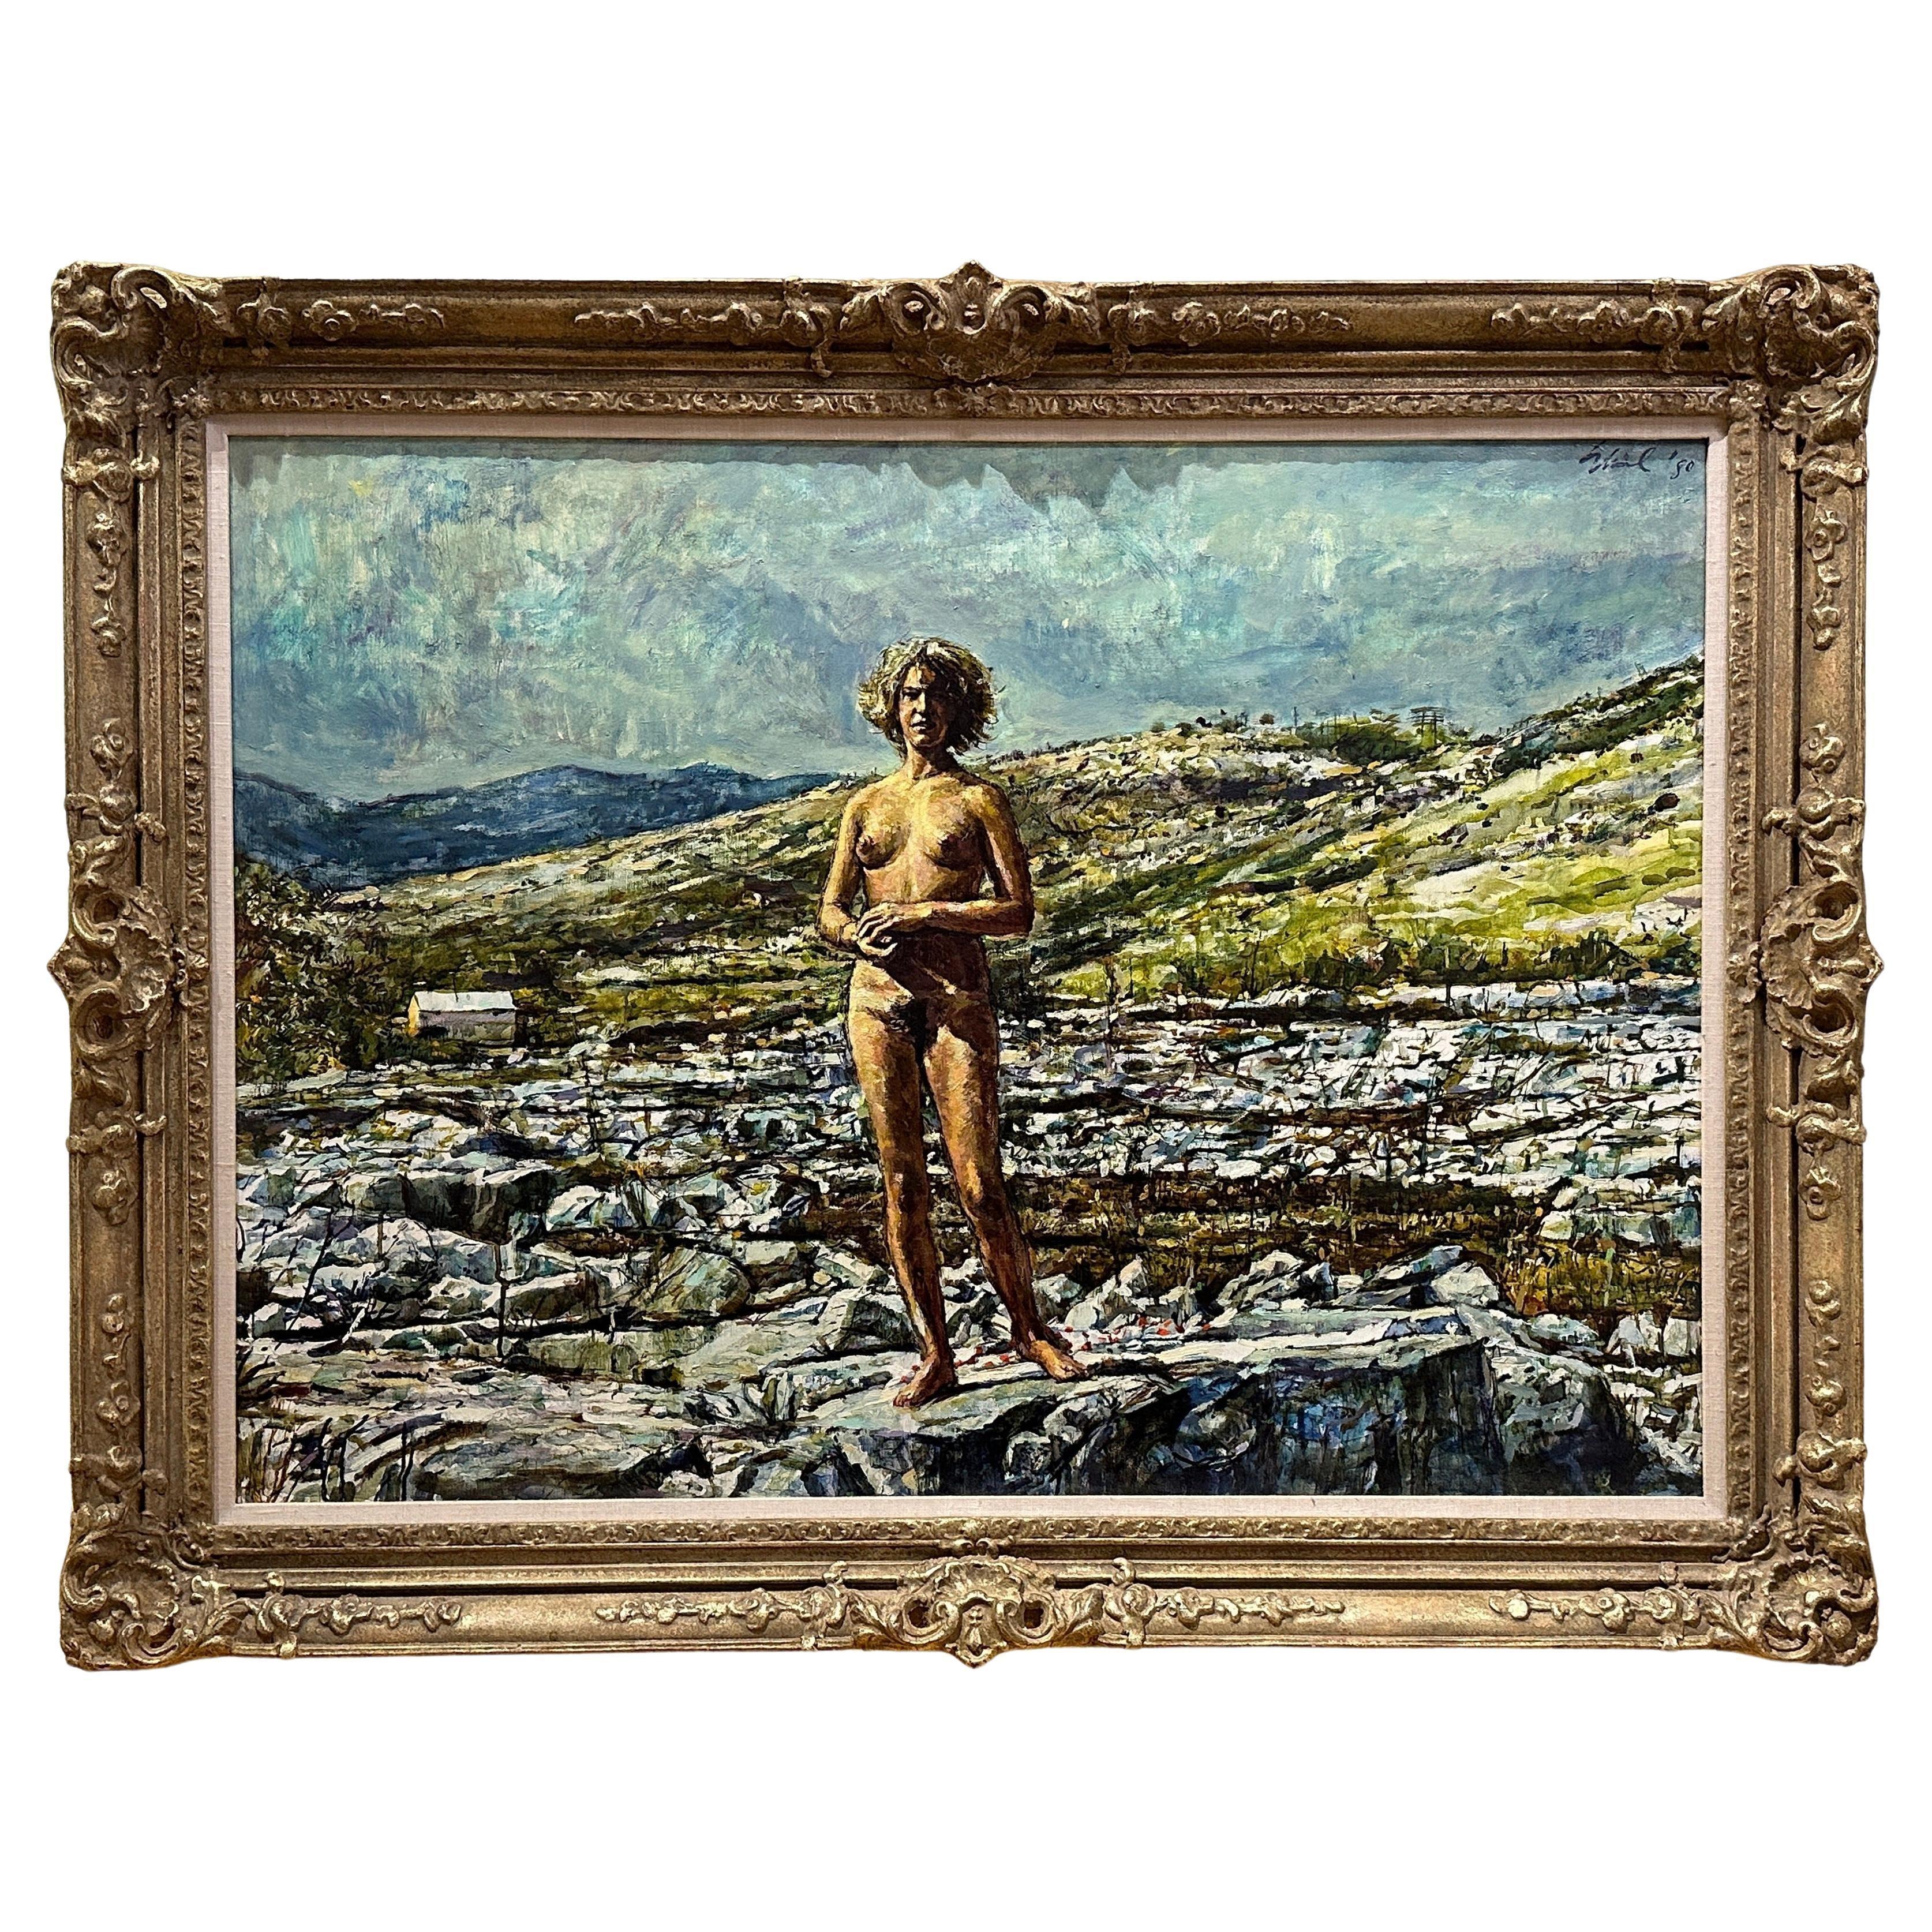 Unknown Figurative Painting - Nude Free Woman in a Rocky Mountain Landscape